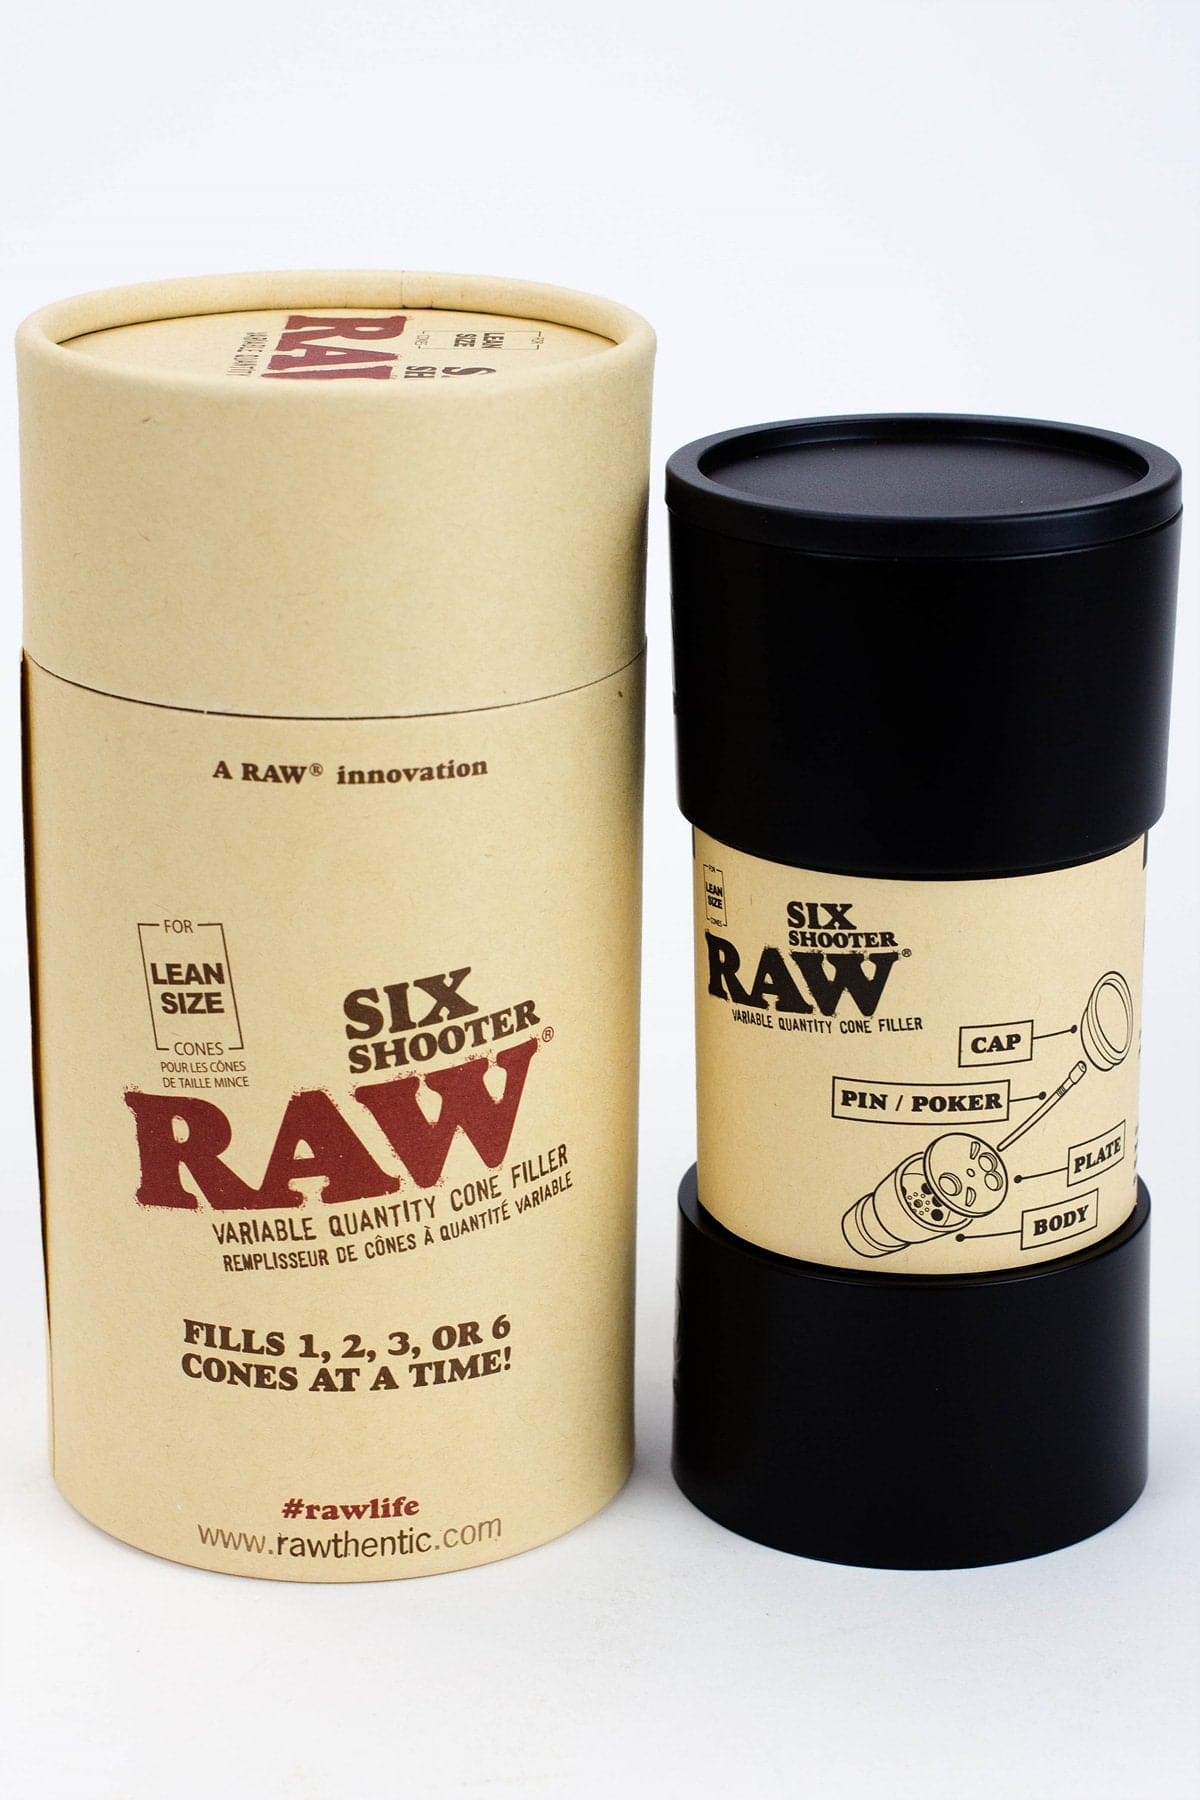 Raw six shooter for Lean size cones